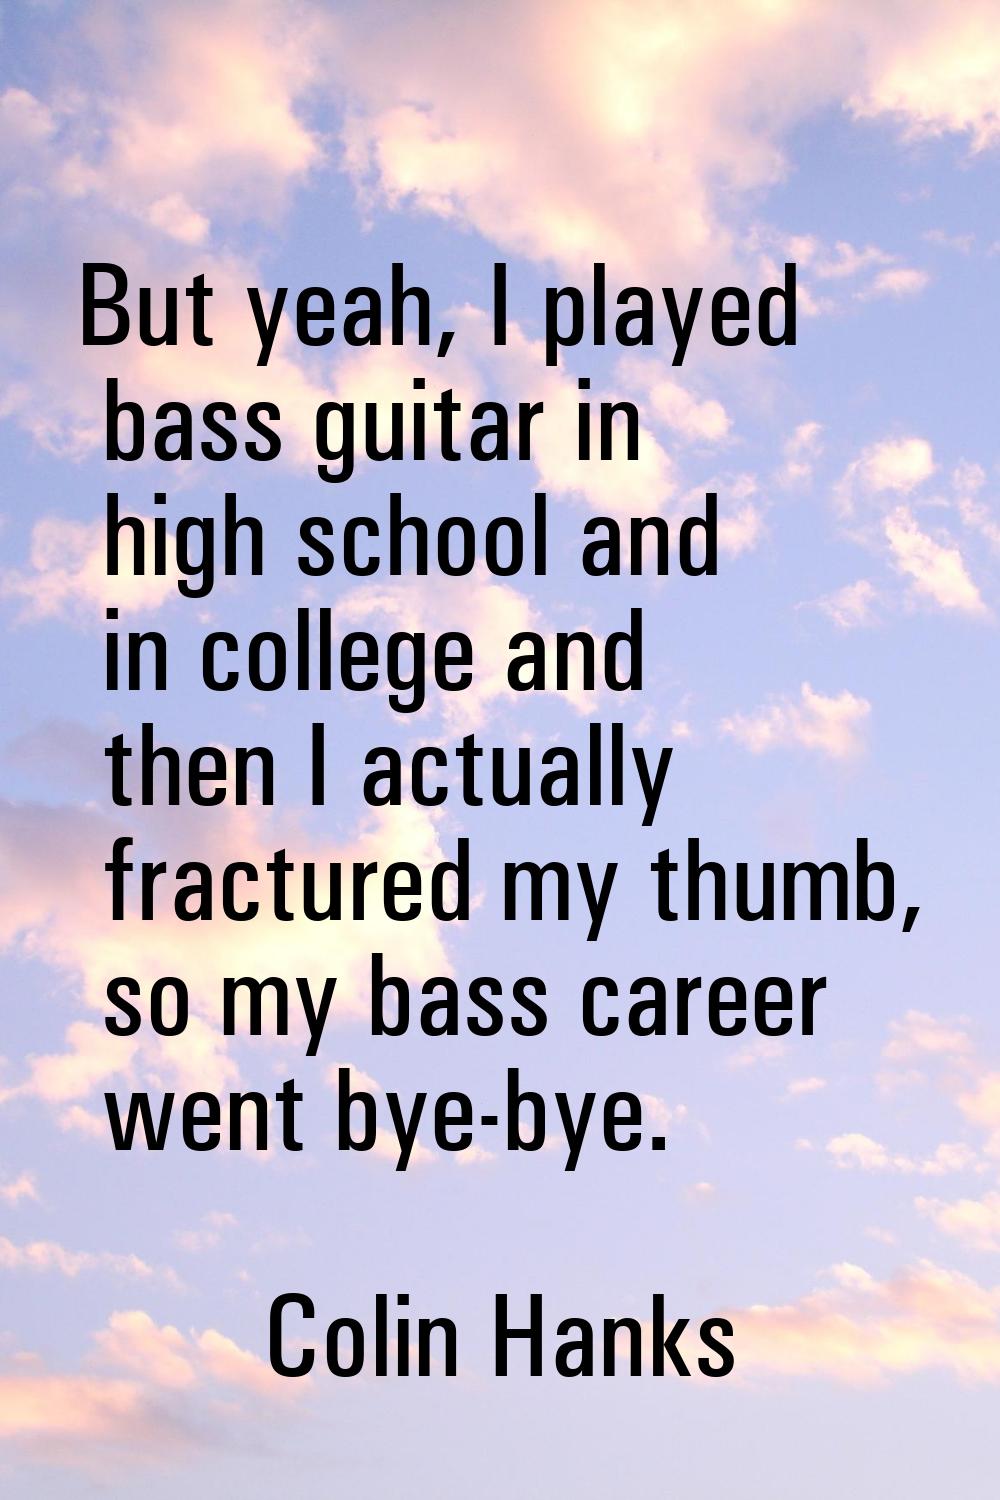 But yeah, I played bass guitar in high school and in college and then I actually fractured my thumb